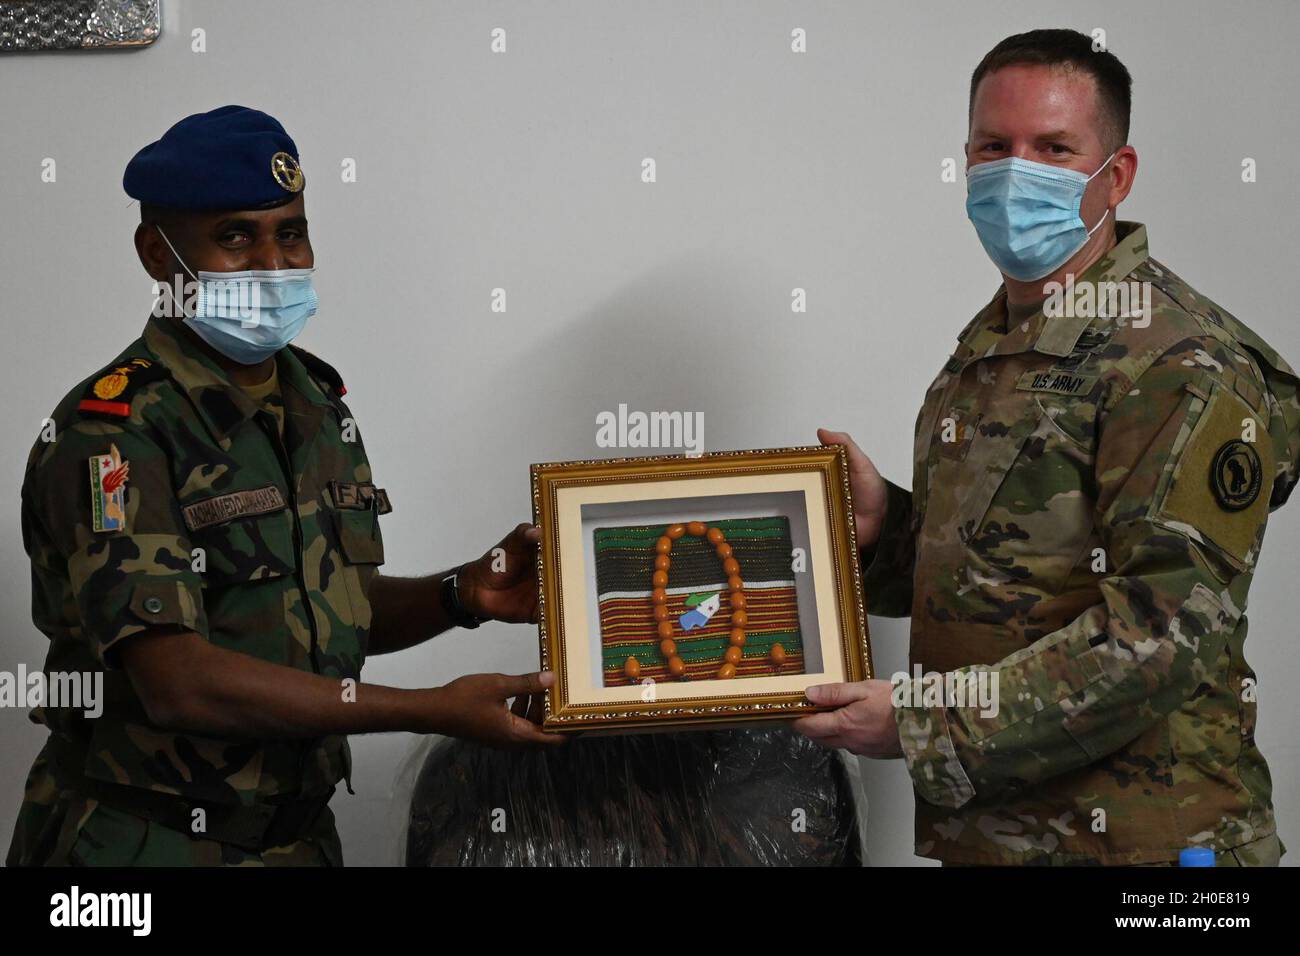 Lt. Col. Mohamed Djama Kyad (left), the Armed Forces of Djibouti (FAD) commander, presents a gift to U.S. Army Maj. Jonathan Holliday (right), Kentucky National Guard Bilateral Affairs Officer, at the FAD military training center at Holhol, Djibouti Feb. 8, 2021. The Kentucky National Guard has been partners with Djibouti since 2015 as part of the State Partners Program (SPP) with the focus to promote mutually-beneficial relationships. Stock Photo